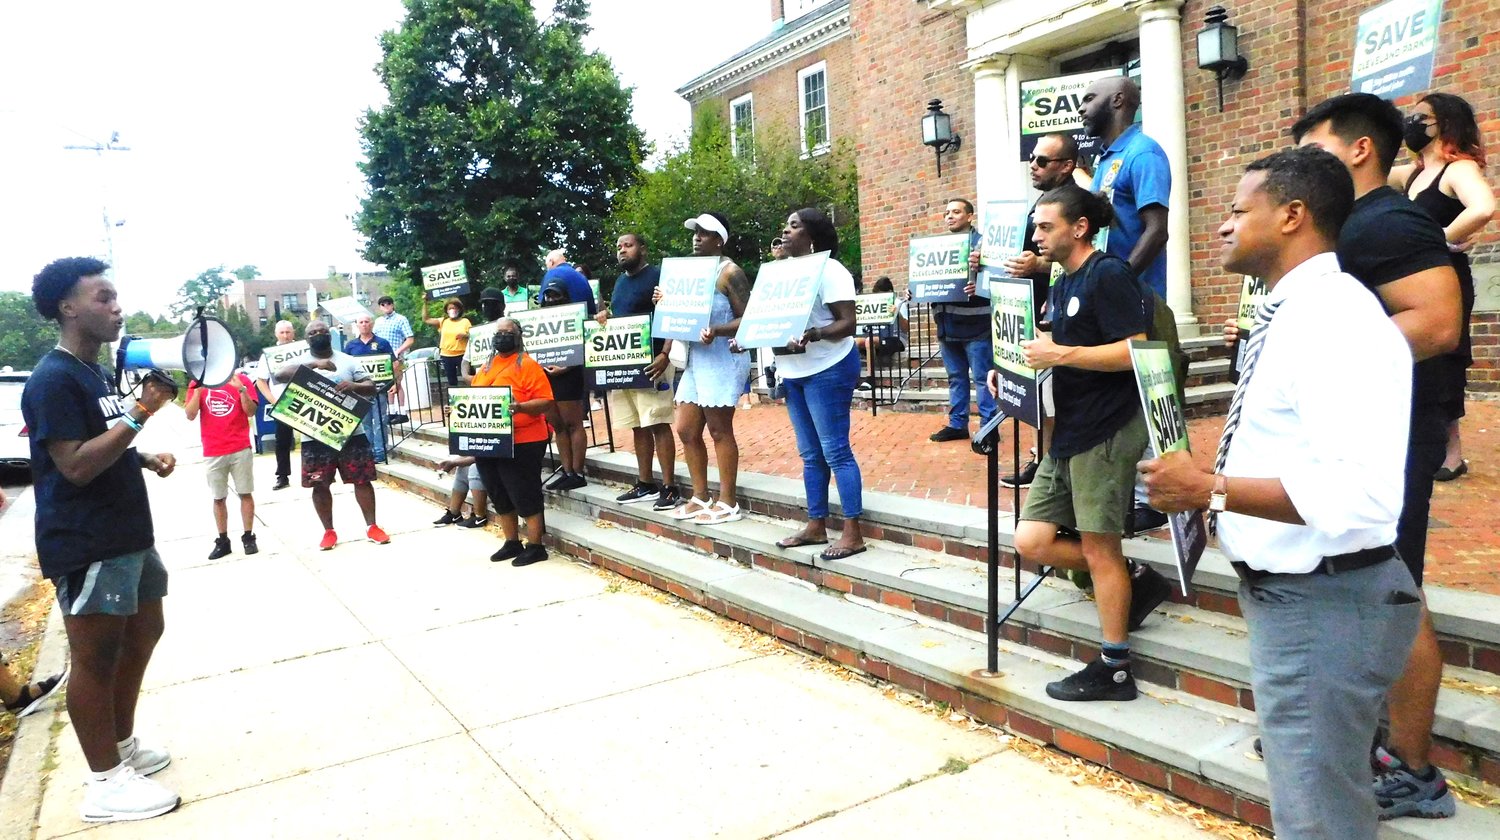 Reine Bethany/Herald
Freeport schools alumnus Myles Hollingsworth spoke in favor of preserving the Cleveland Avenue athletic field at a rally on Monday night on the steps of the municipal building.